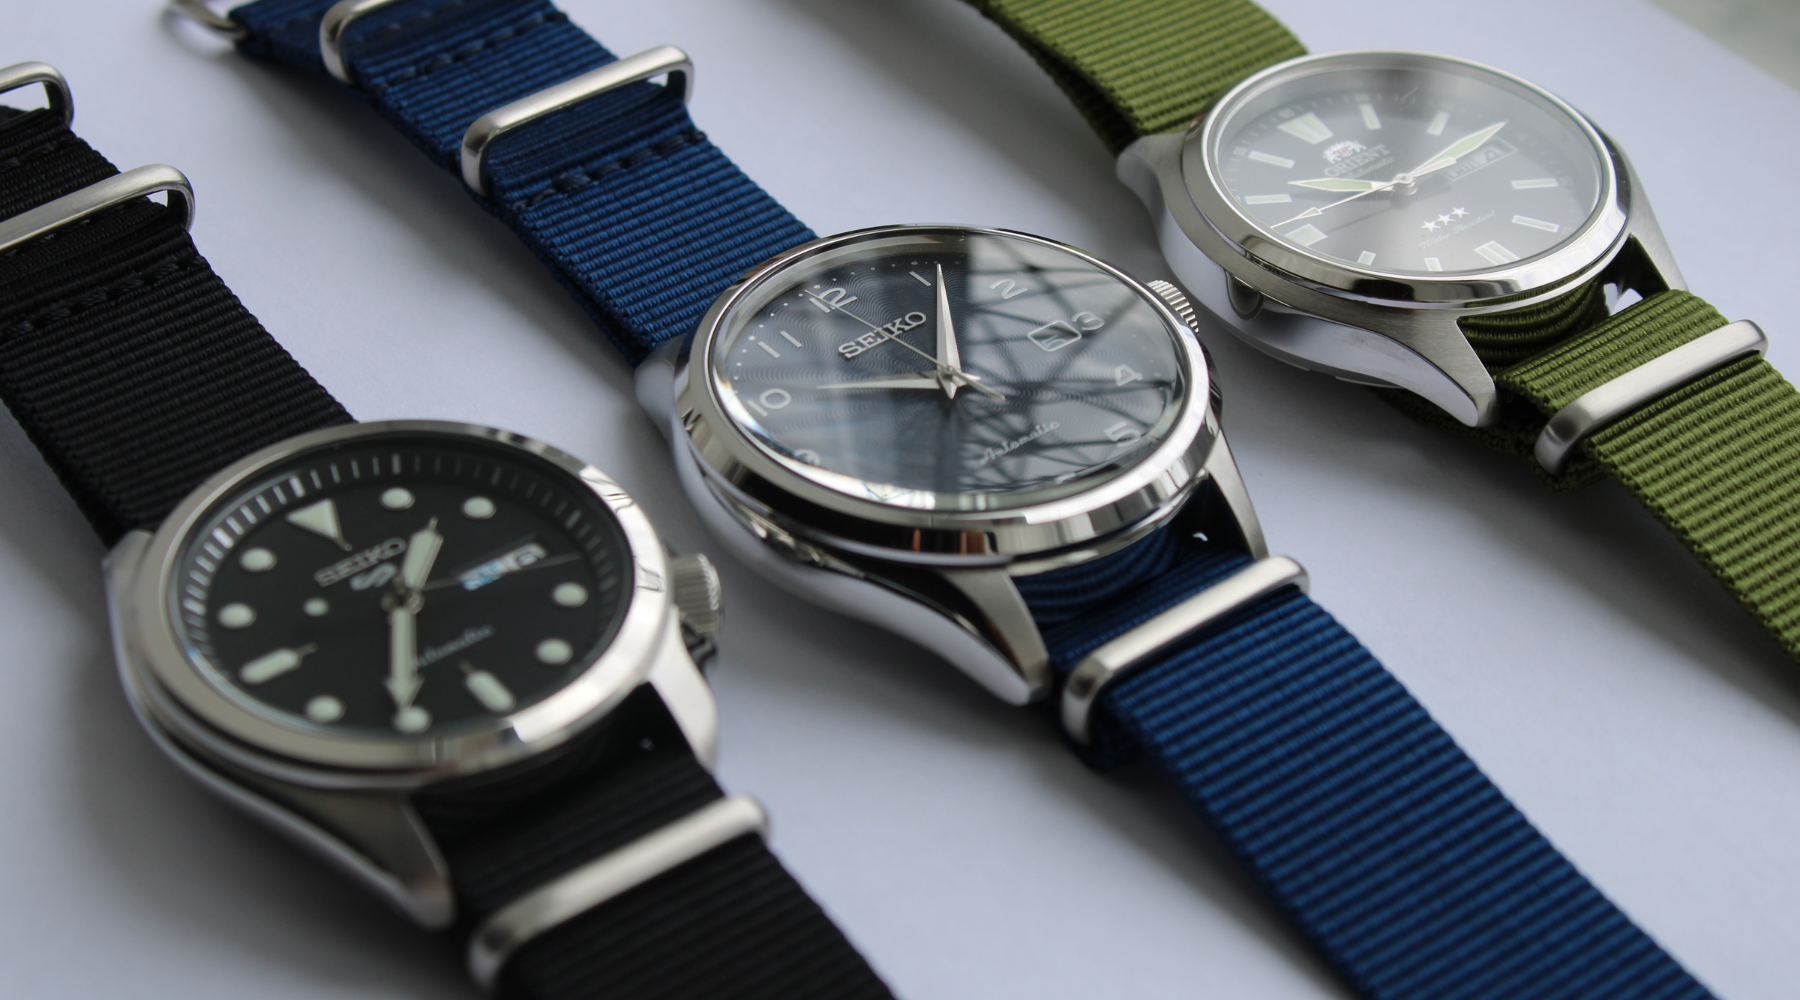 Article: Editor’s Pick: The Best New Watches Under £1000